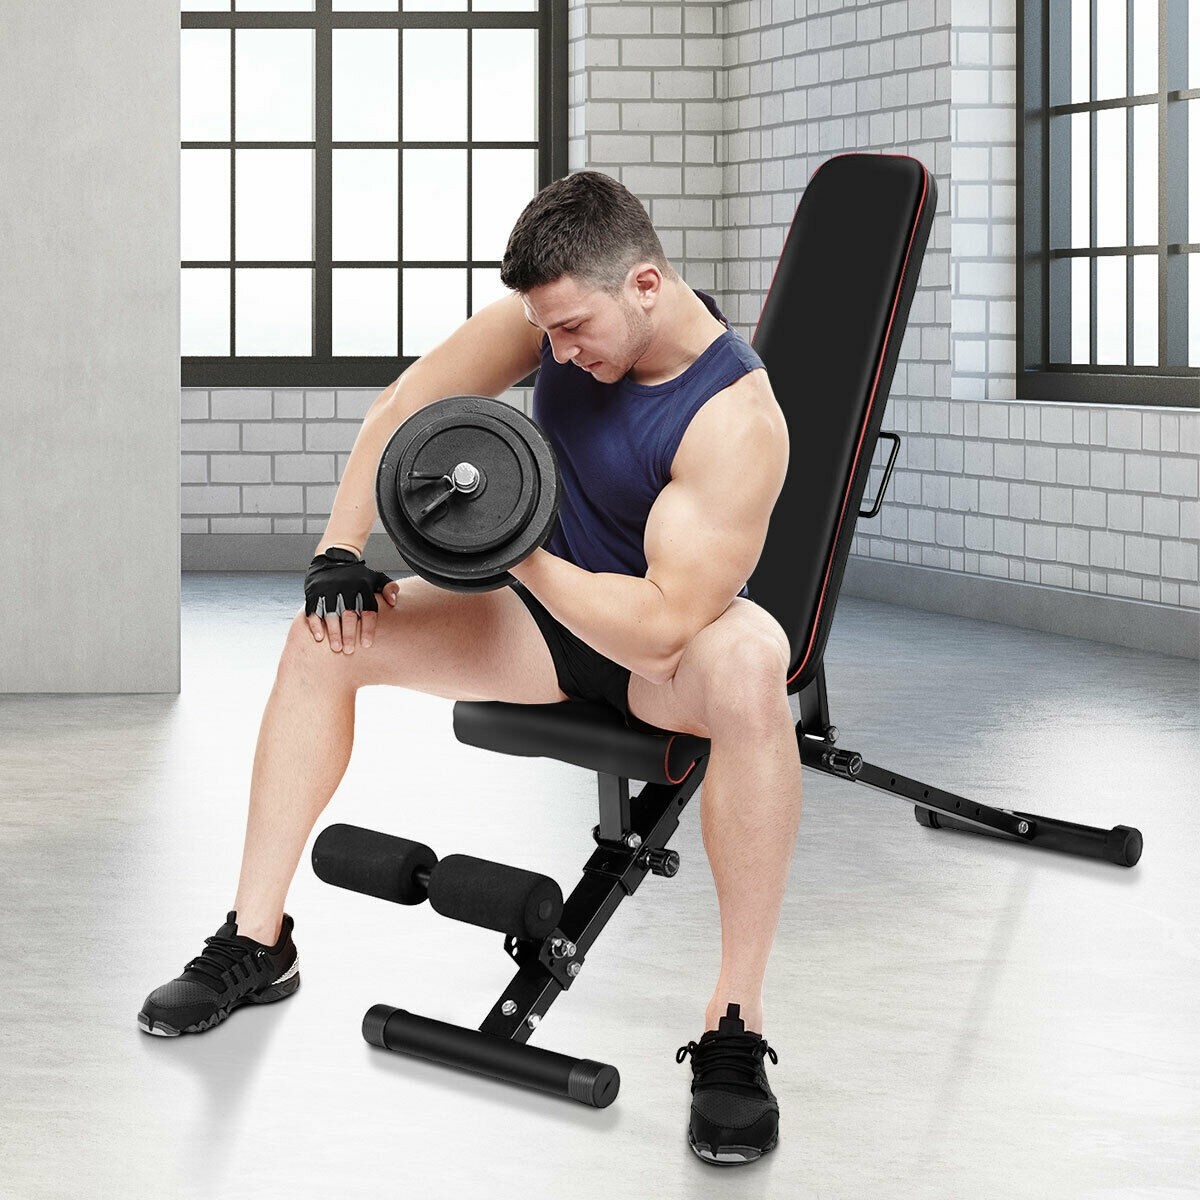 Adjustable Foldable Durable Compact Exercise Bench